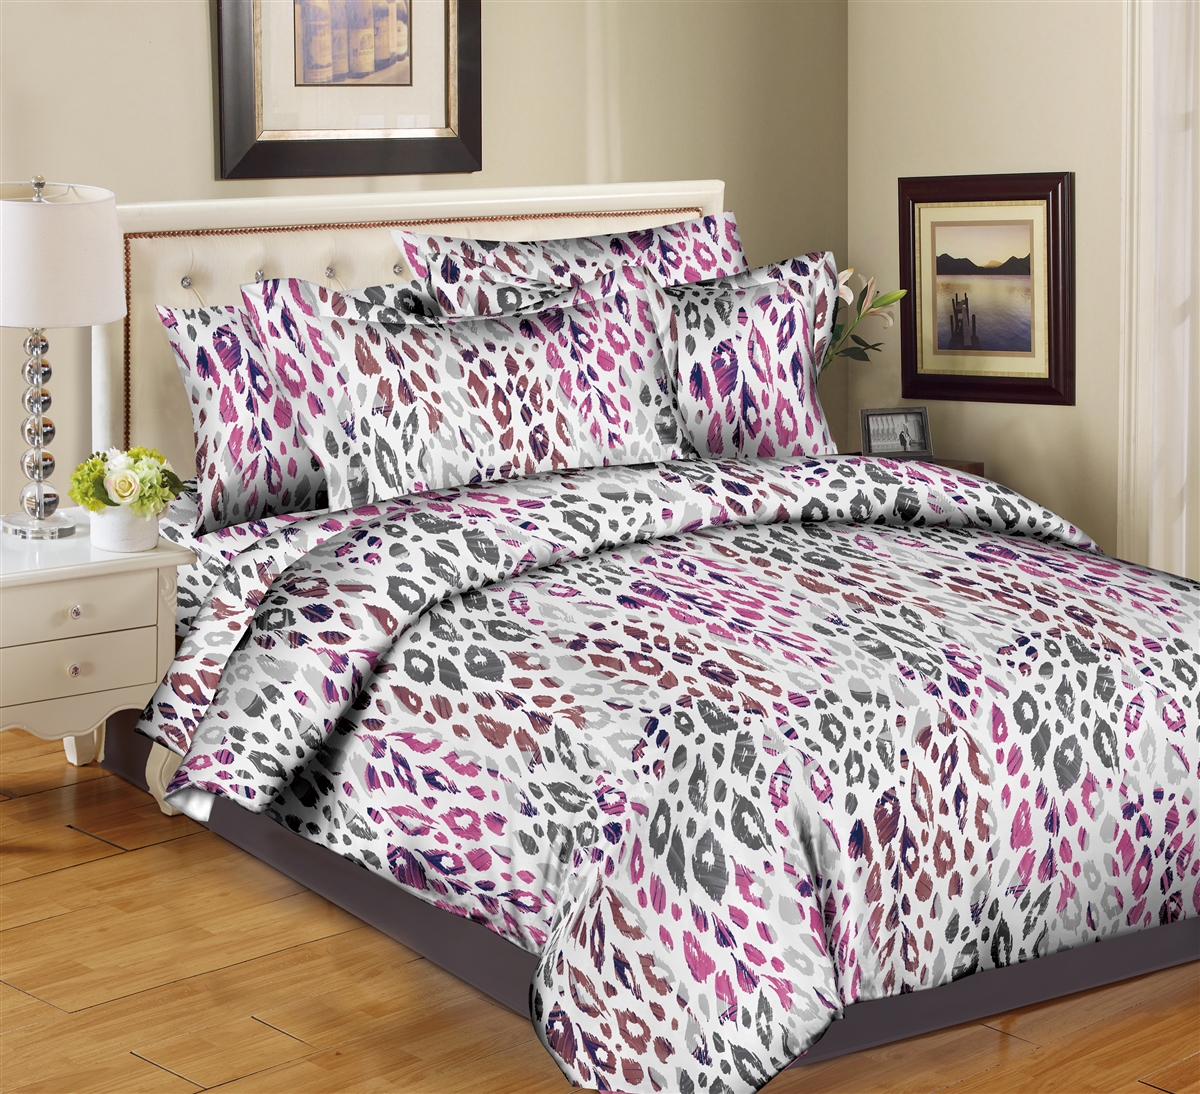 Better Bed Collection: Leopard Trend- Pink 8PC Twin Bedding Set